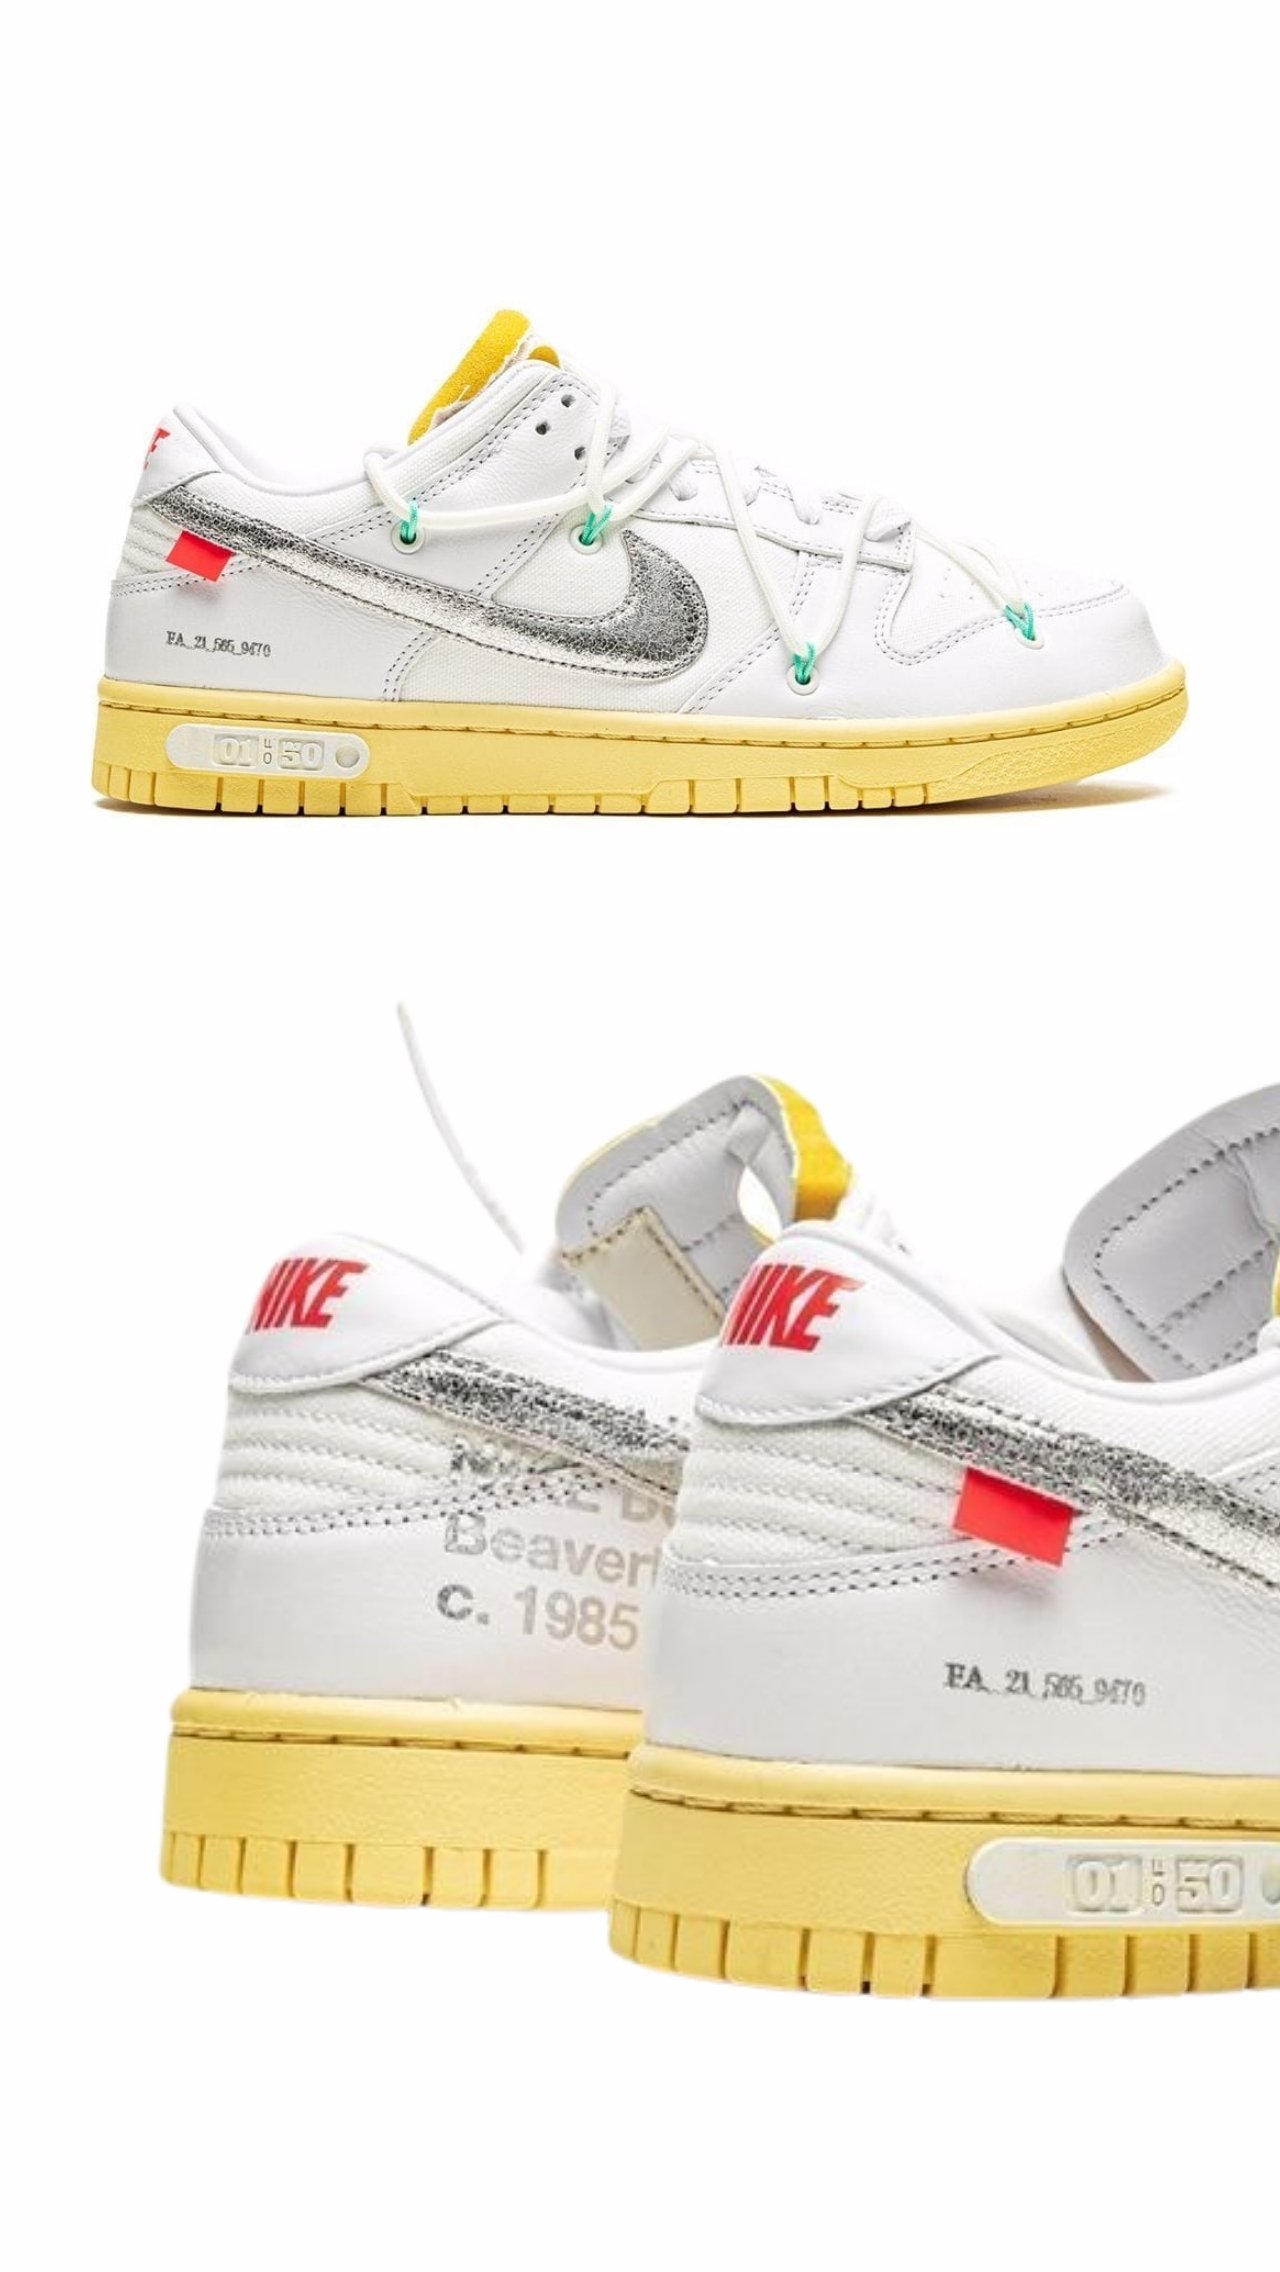 Off-White x Nike Dunk Low Lot 1